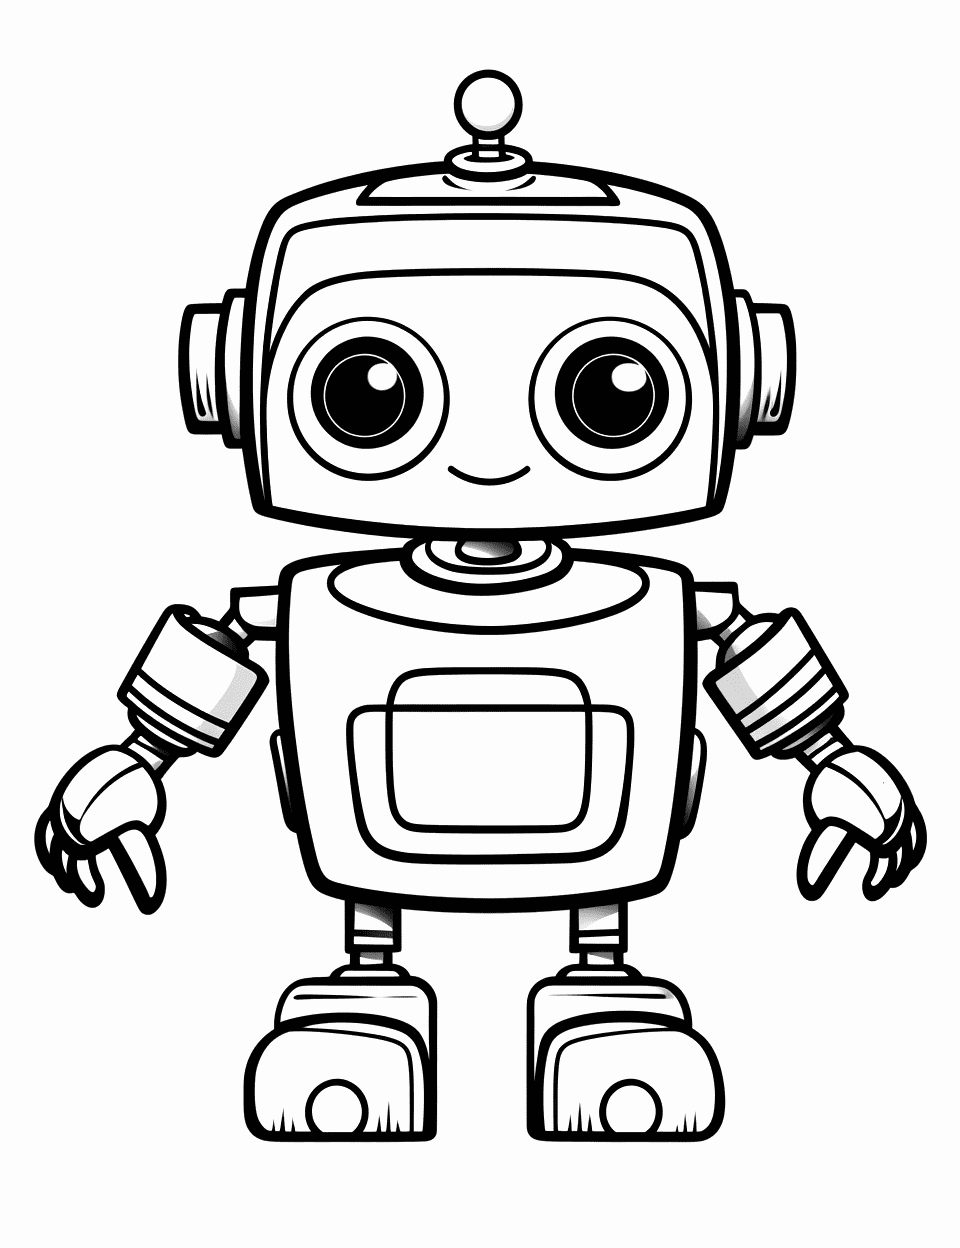 Easy Robot Drawing Coloring Page - A simple preschool-friendly, boxy robot with large, friendly eyes.